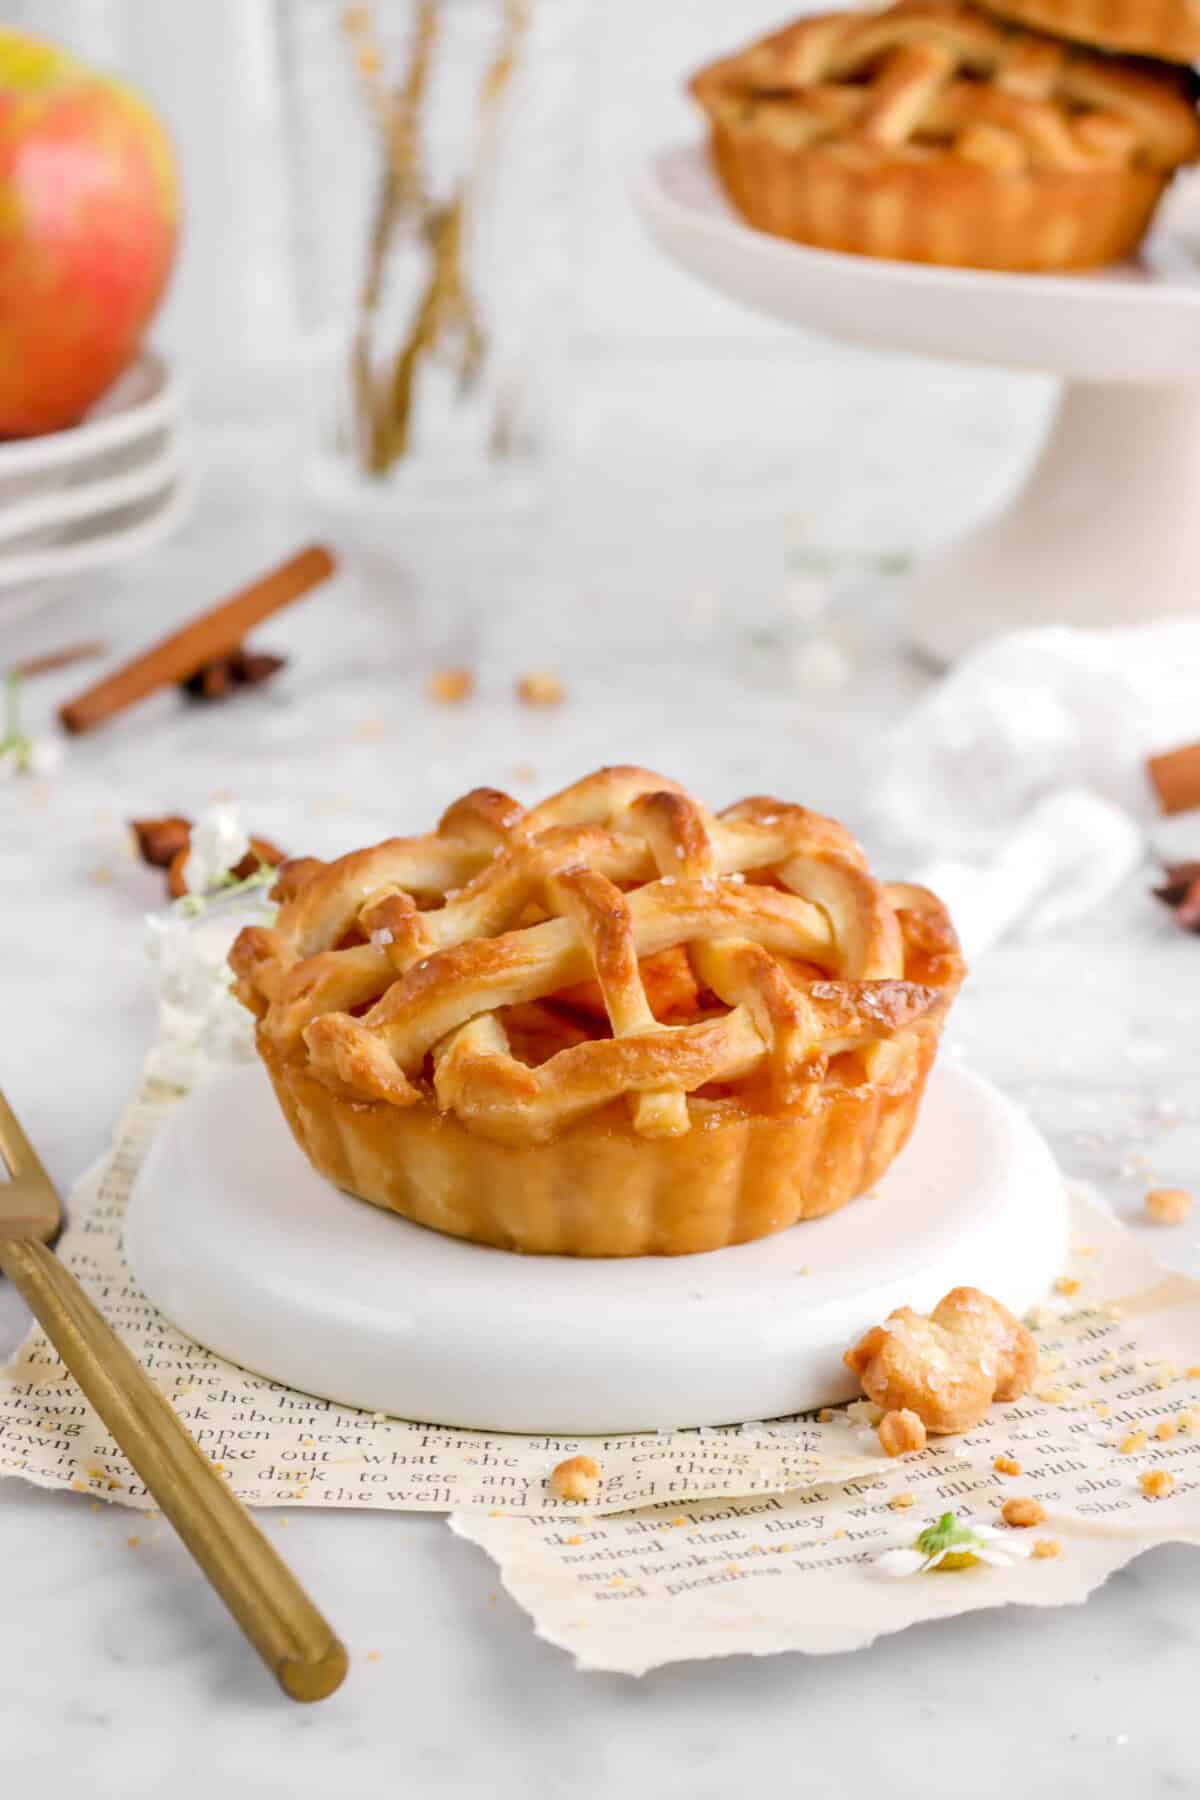 mini pie on plate with gold fork, book pages, and spices around